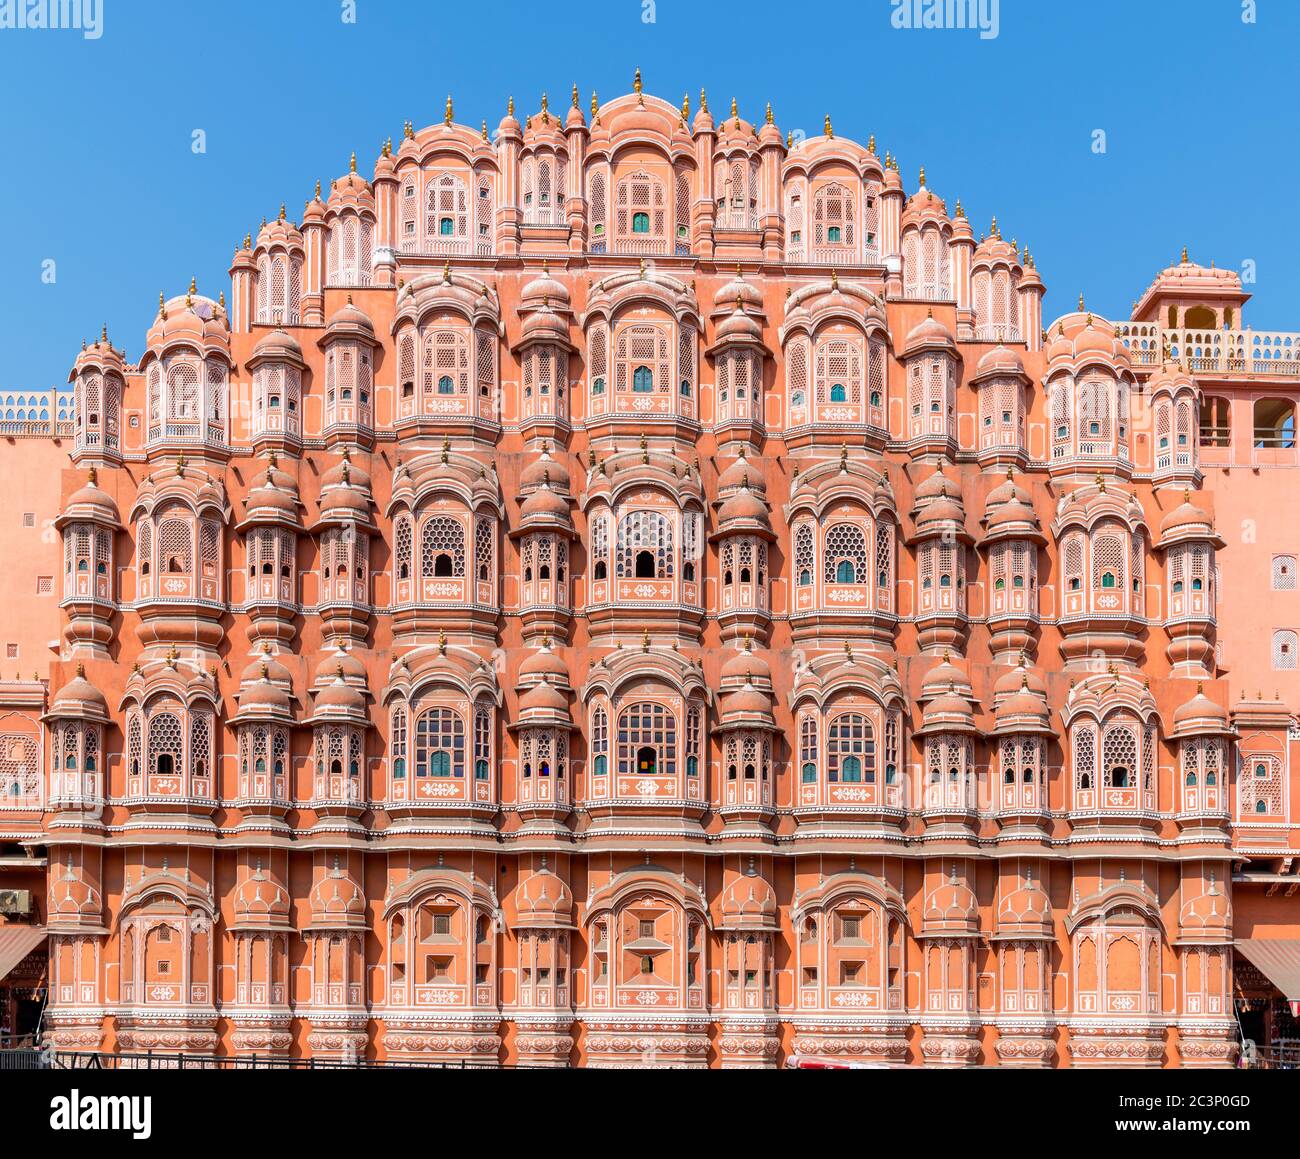 Facade of the Hawa Mahal (Palace of the Winds or Palace of the Breeze), the Old City, Jaipur, Rajasthan, India Stock Photo